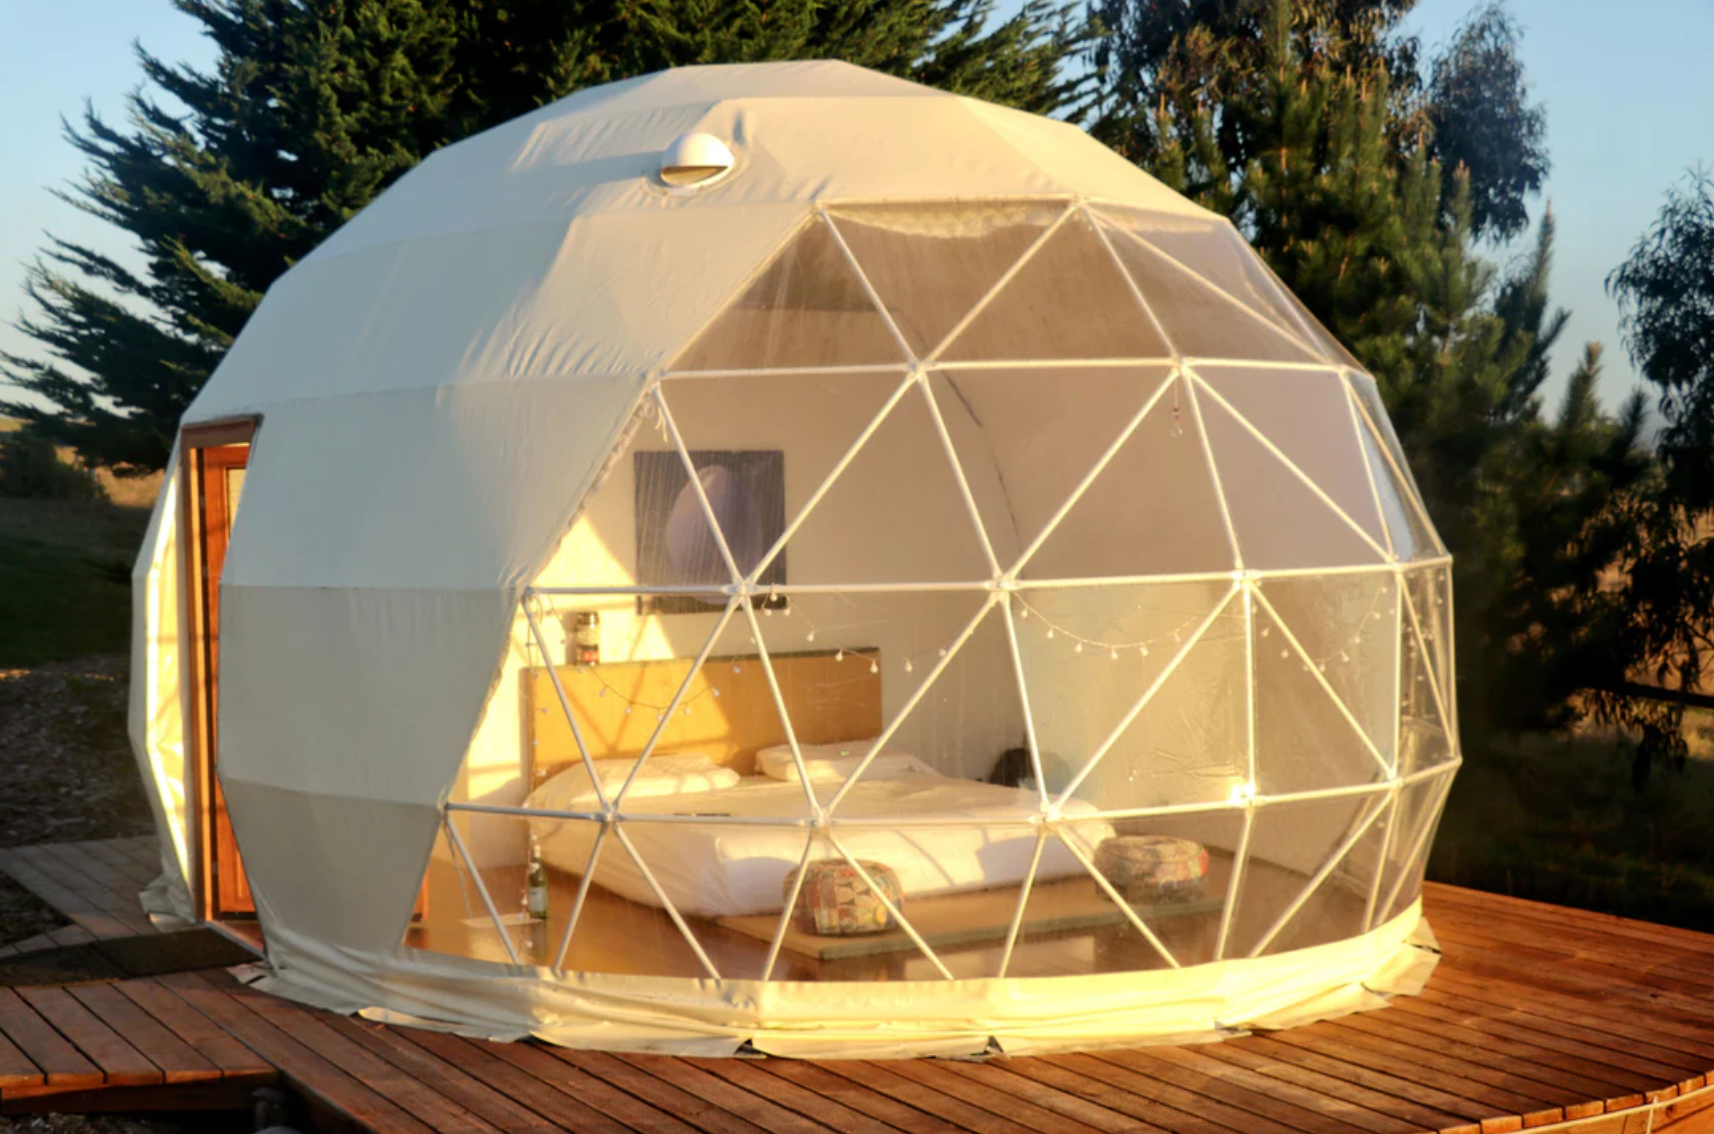 Exclusive oval dome kit for retreats / ADU / glamping / guest House/ yoga studio / getaway home